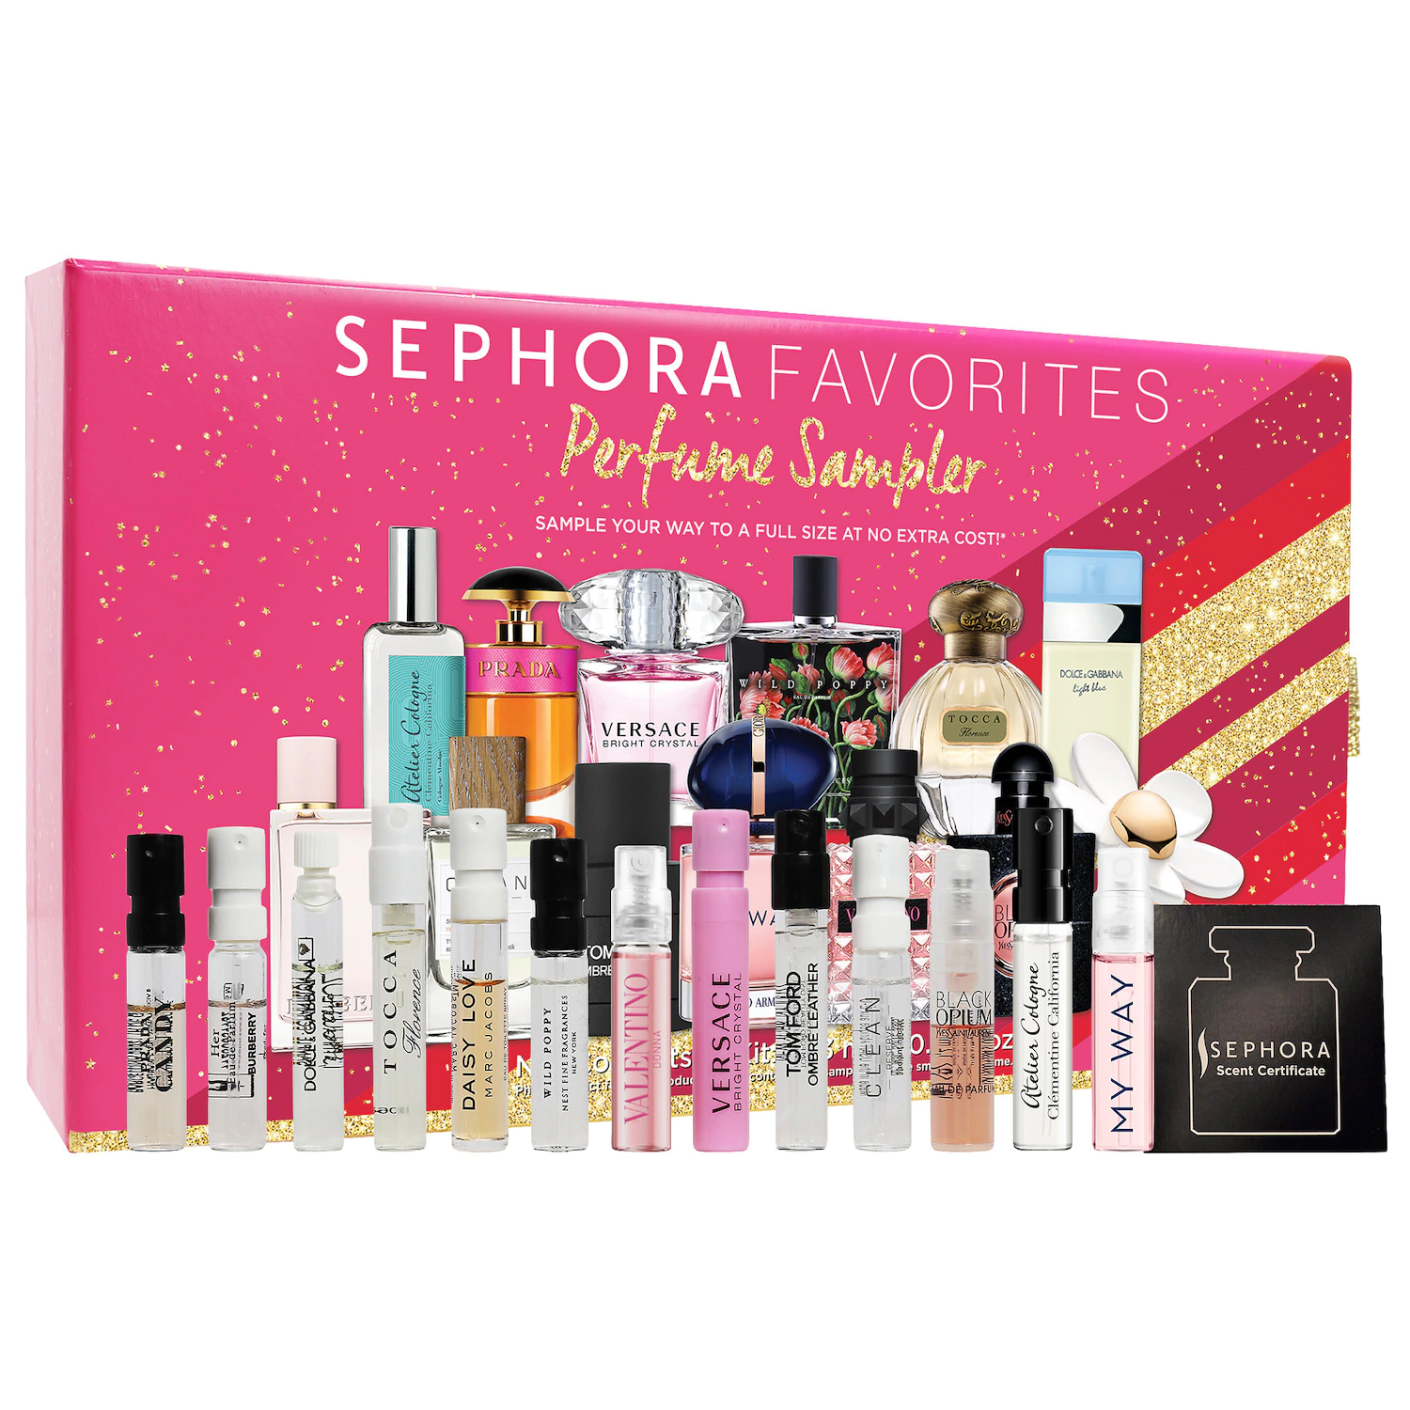 sephora-favorites-holiday-perfume-sampler-set-available-now-coupons